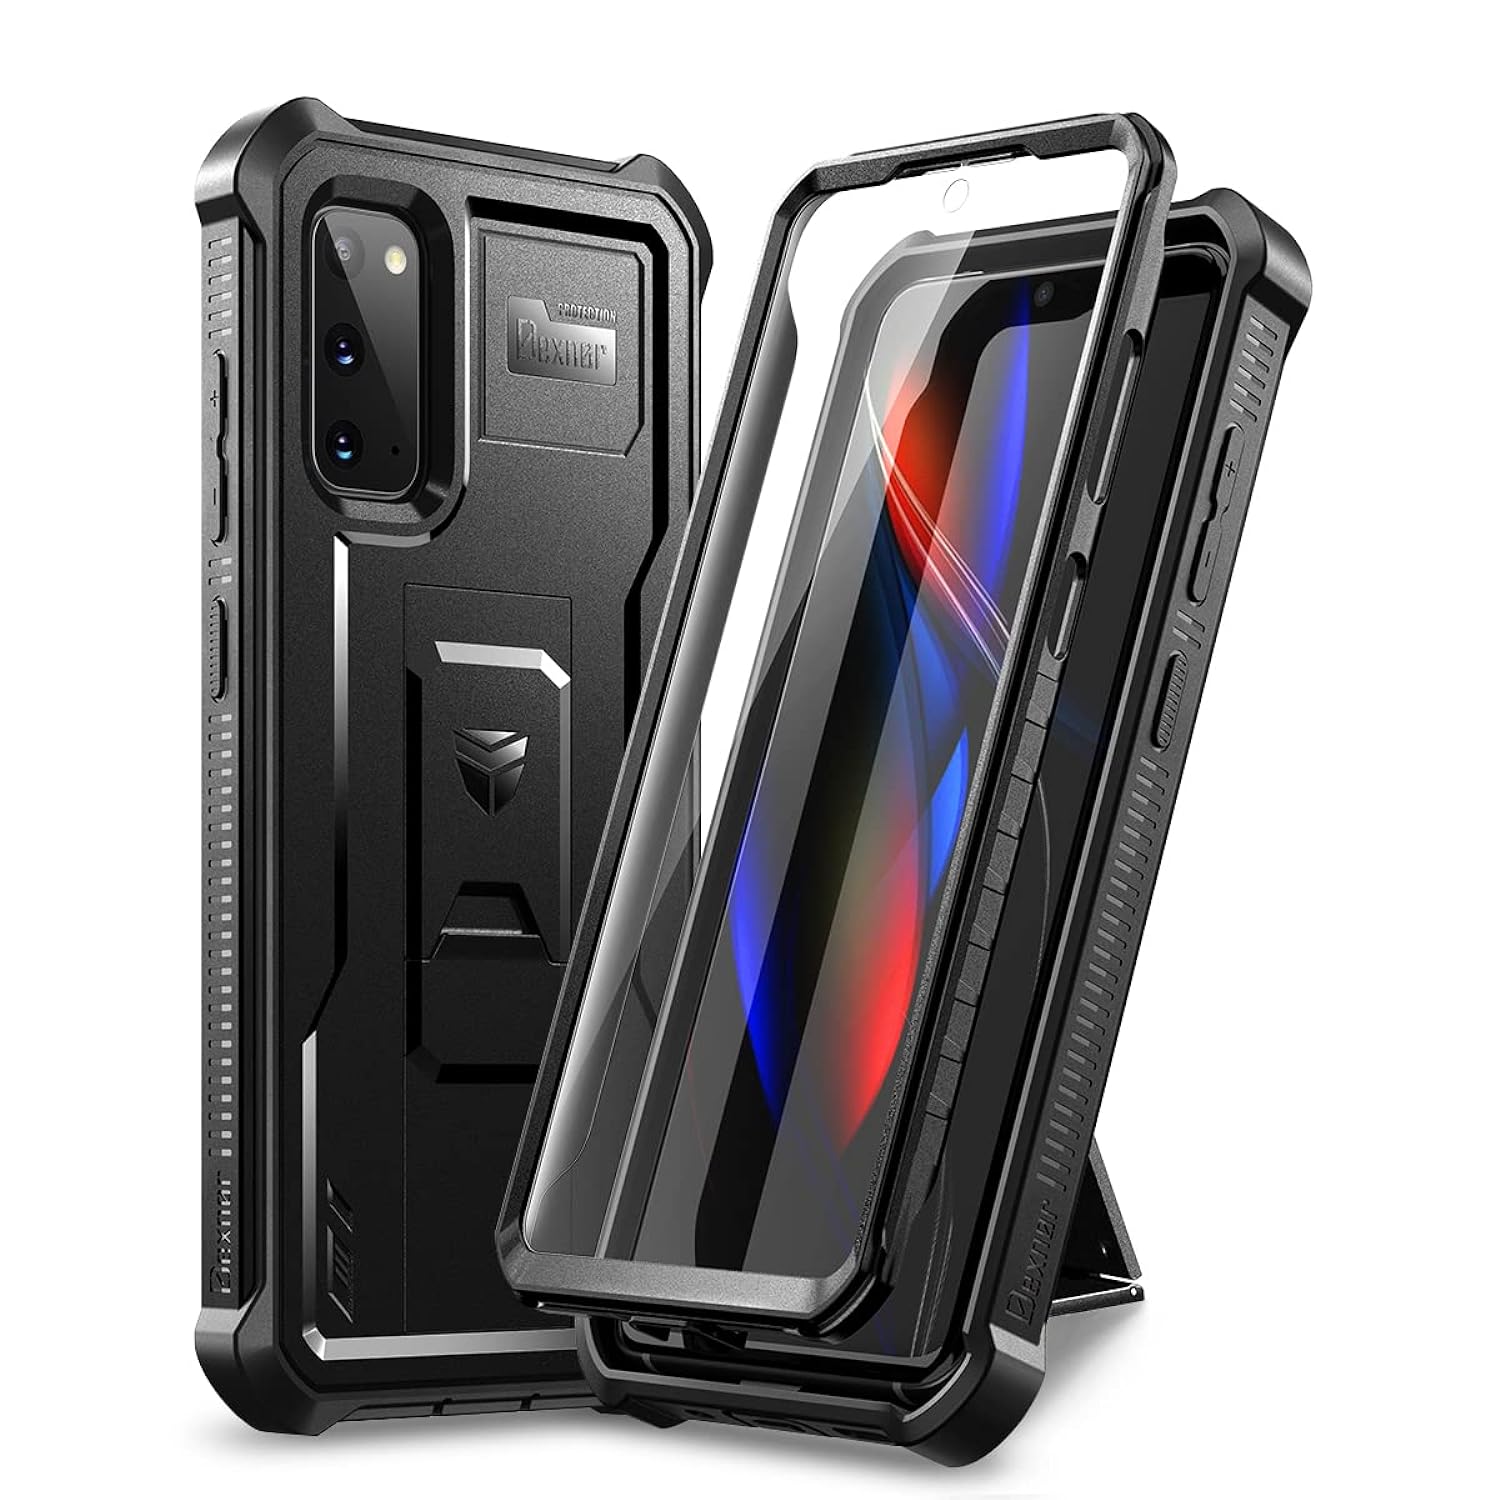 TKM Cell Phones For Samsung Galaxy S20 5G Case, [Built In Screen Protector And Kickstand] Heavy Duty Military Grade Protectio?